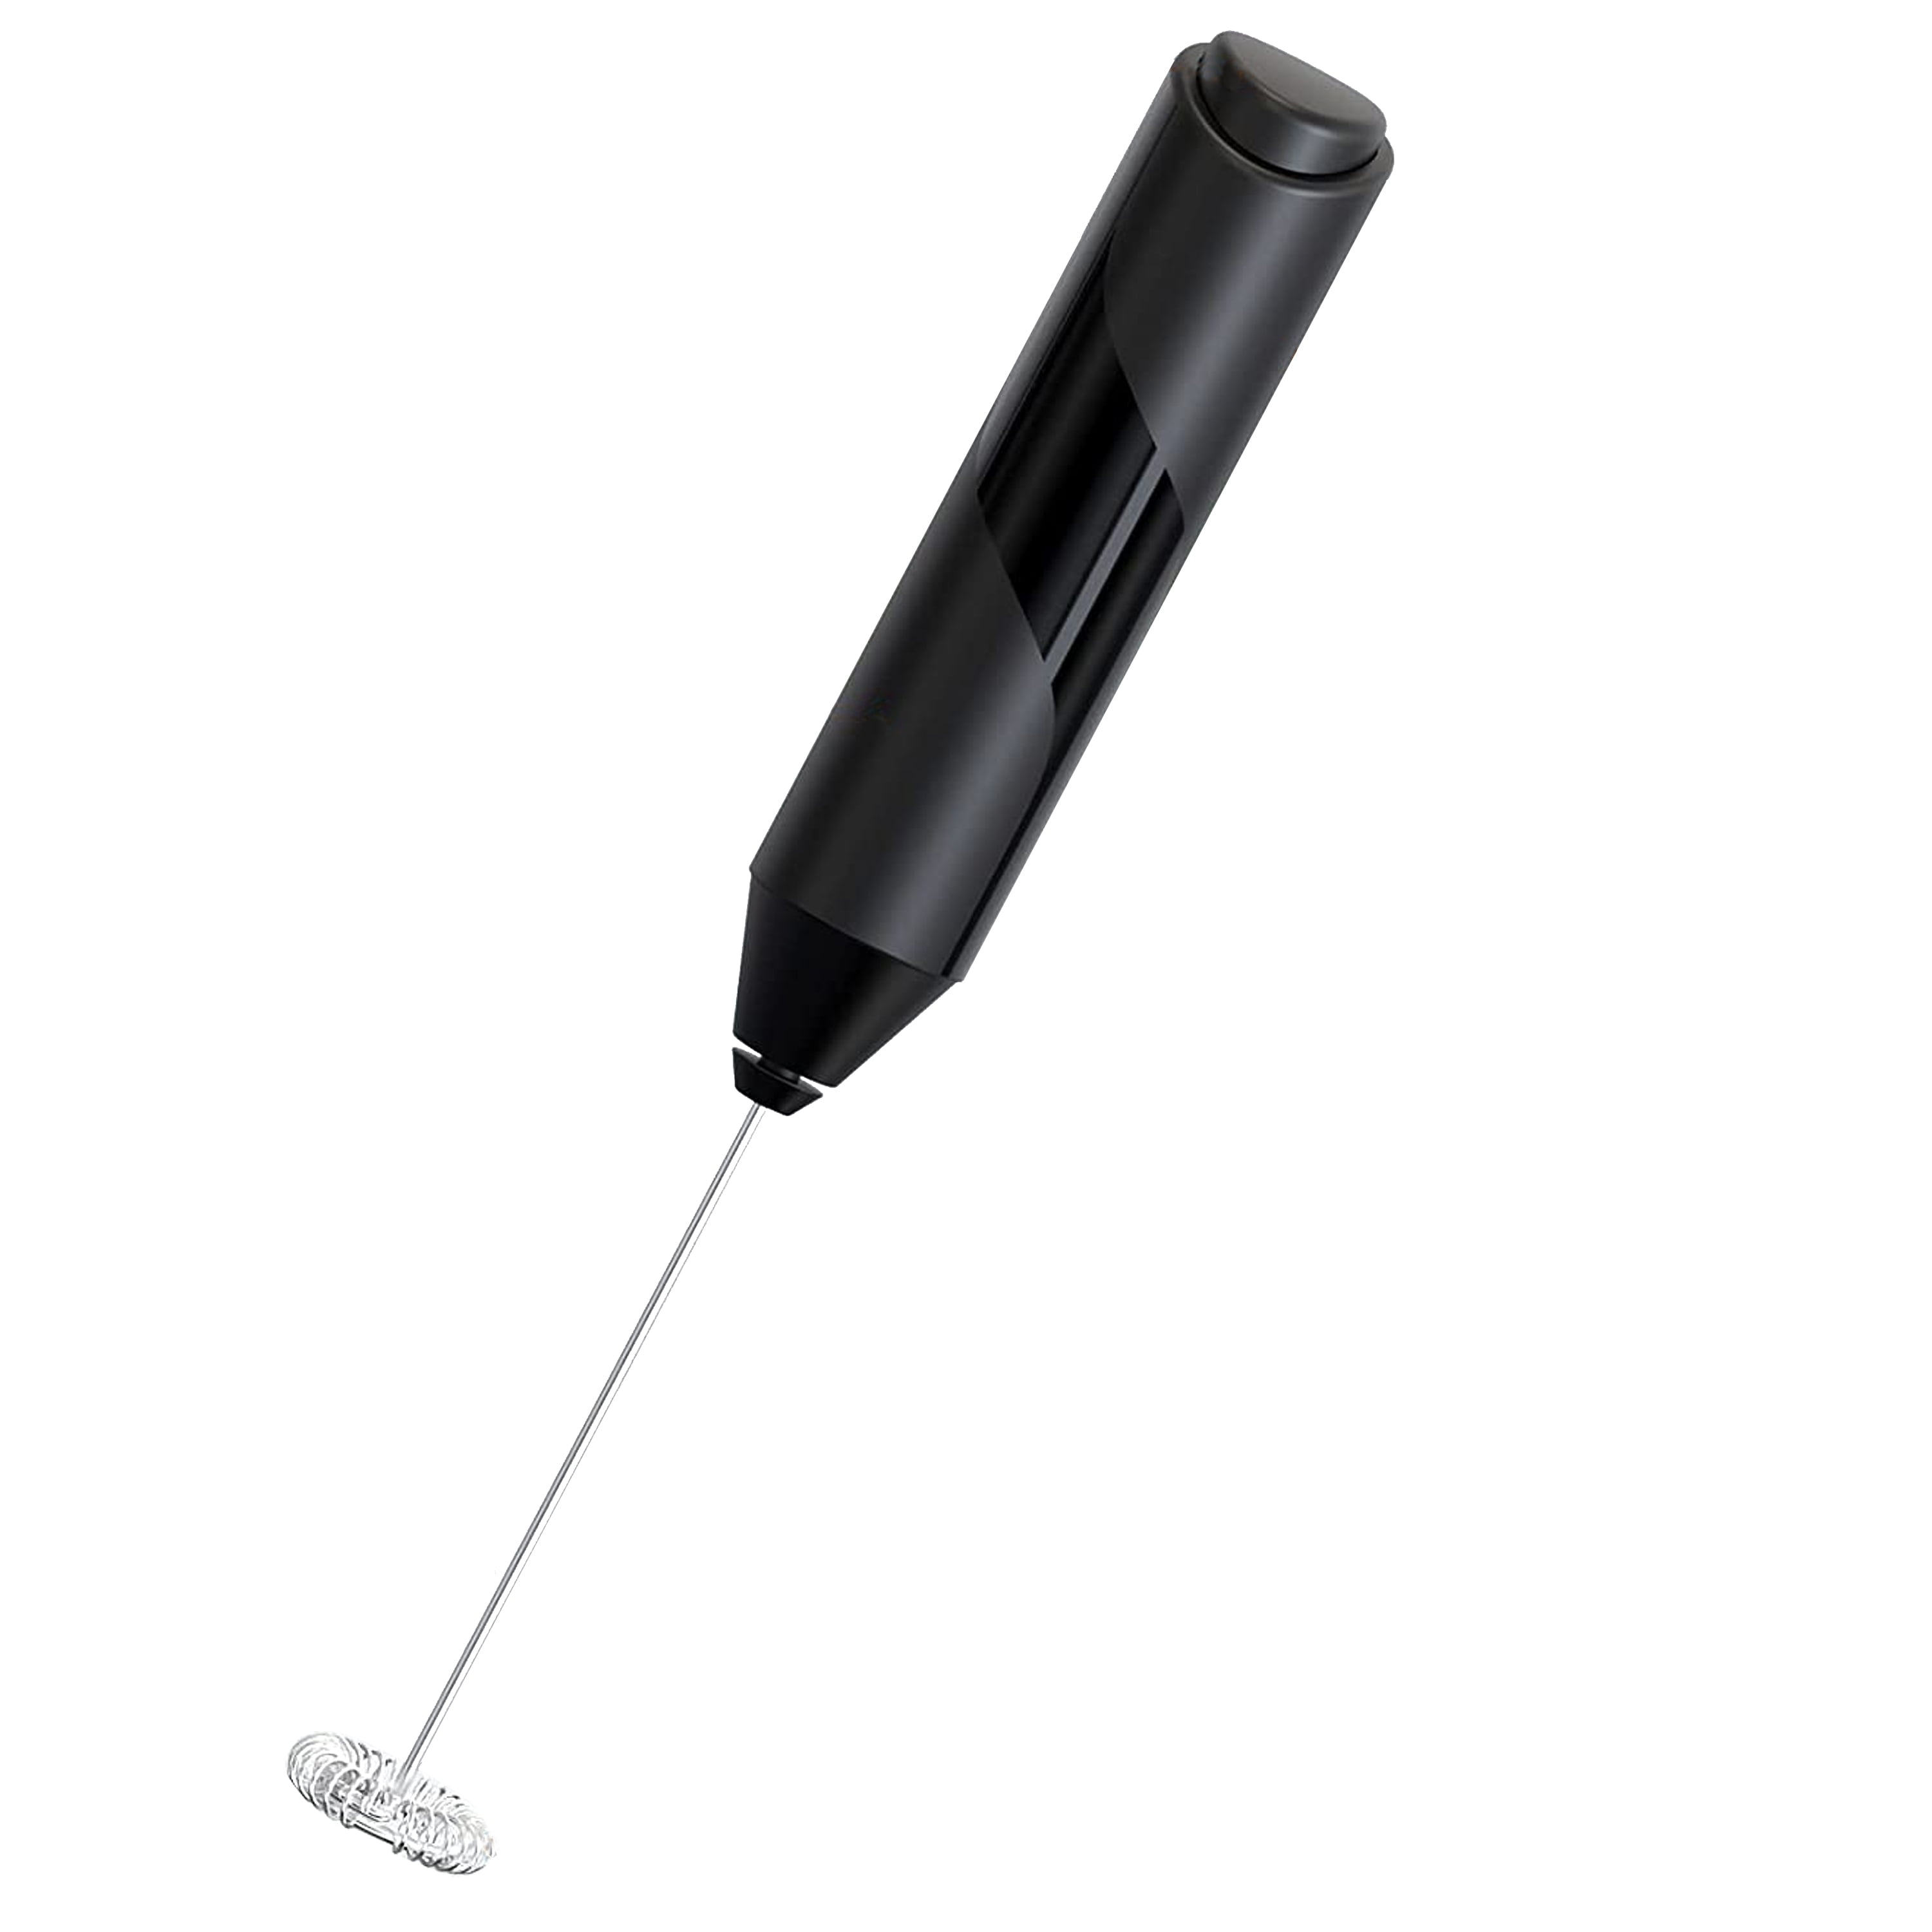 8-Ounce Milk Frother, Only $10 at Walmart (Reg. $16) - The Krazy Coupon Lady